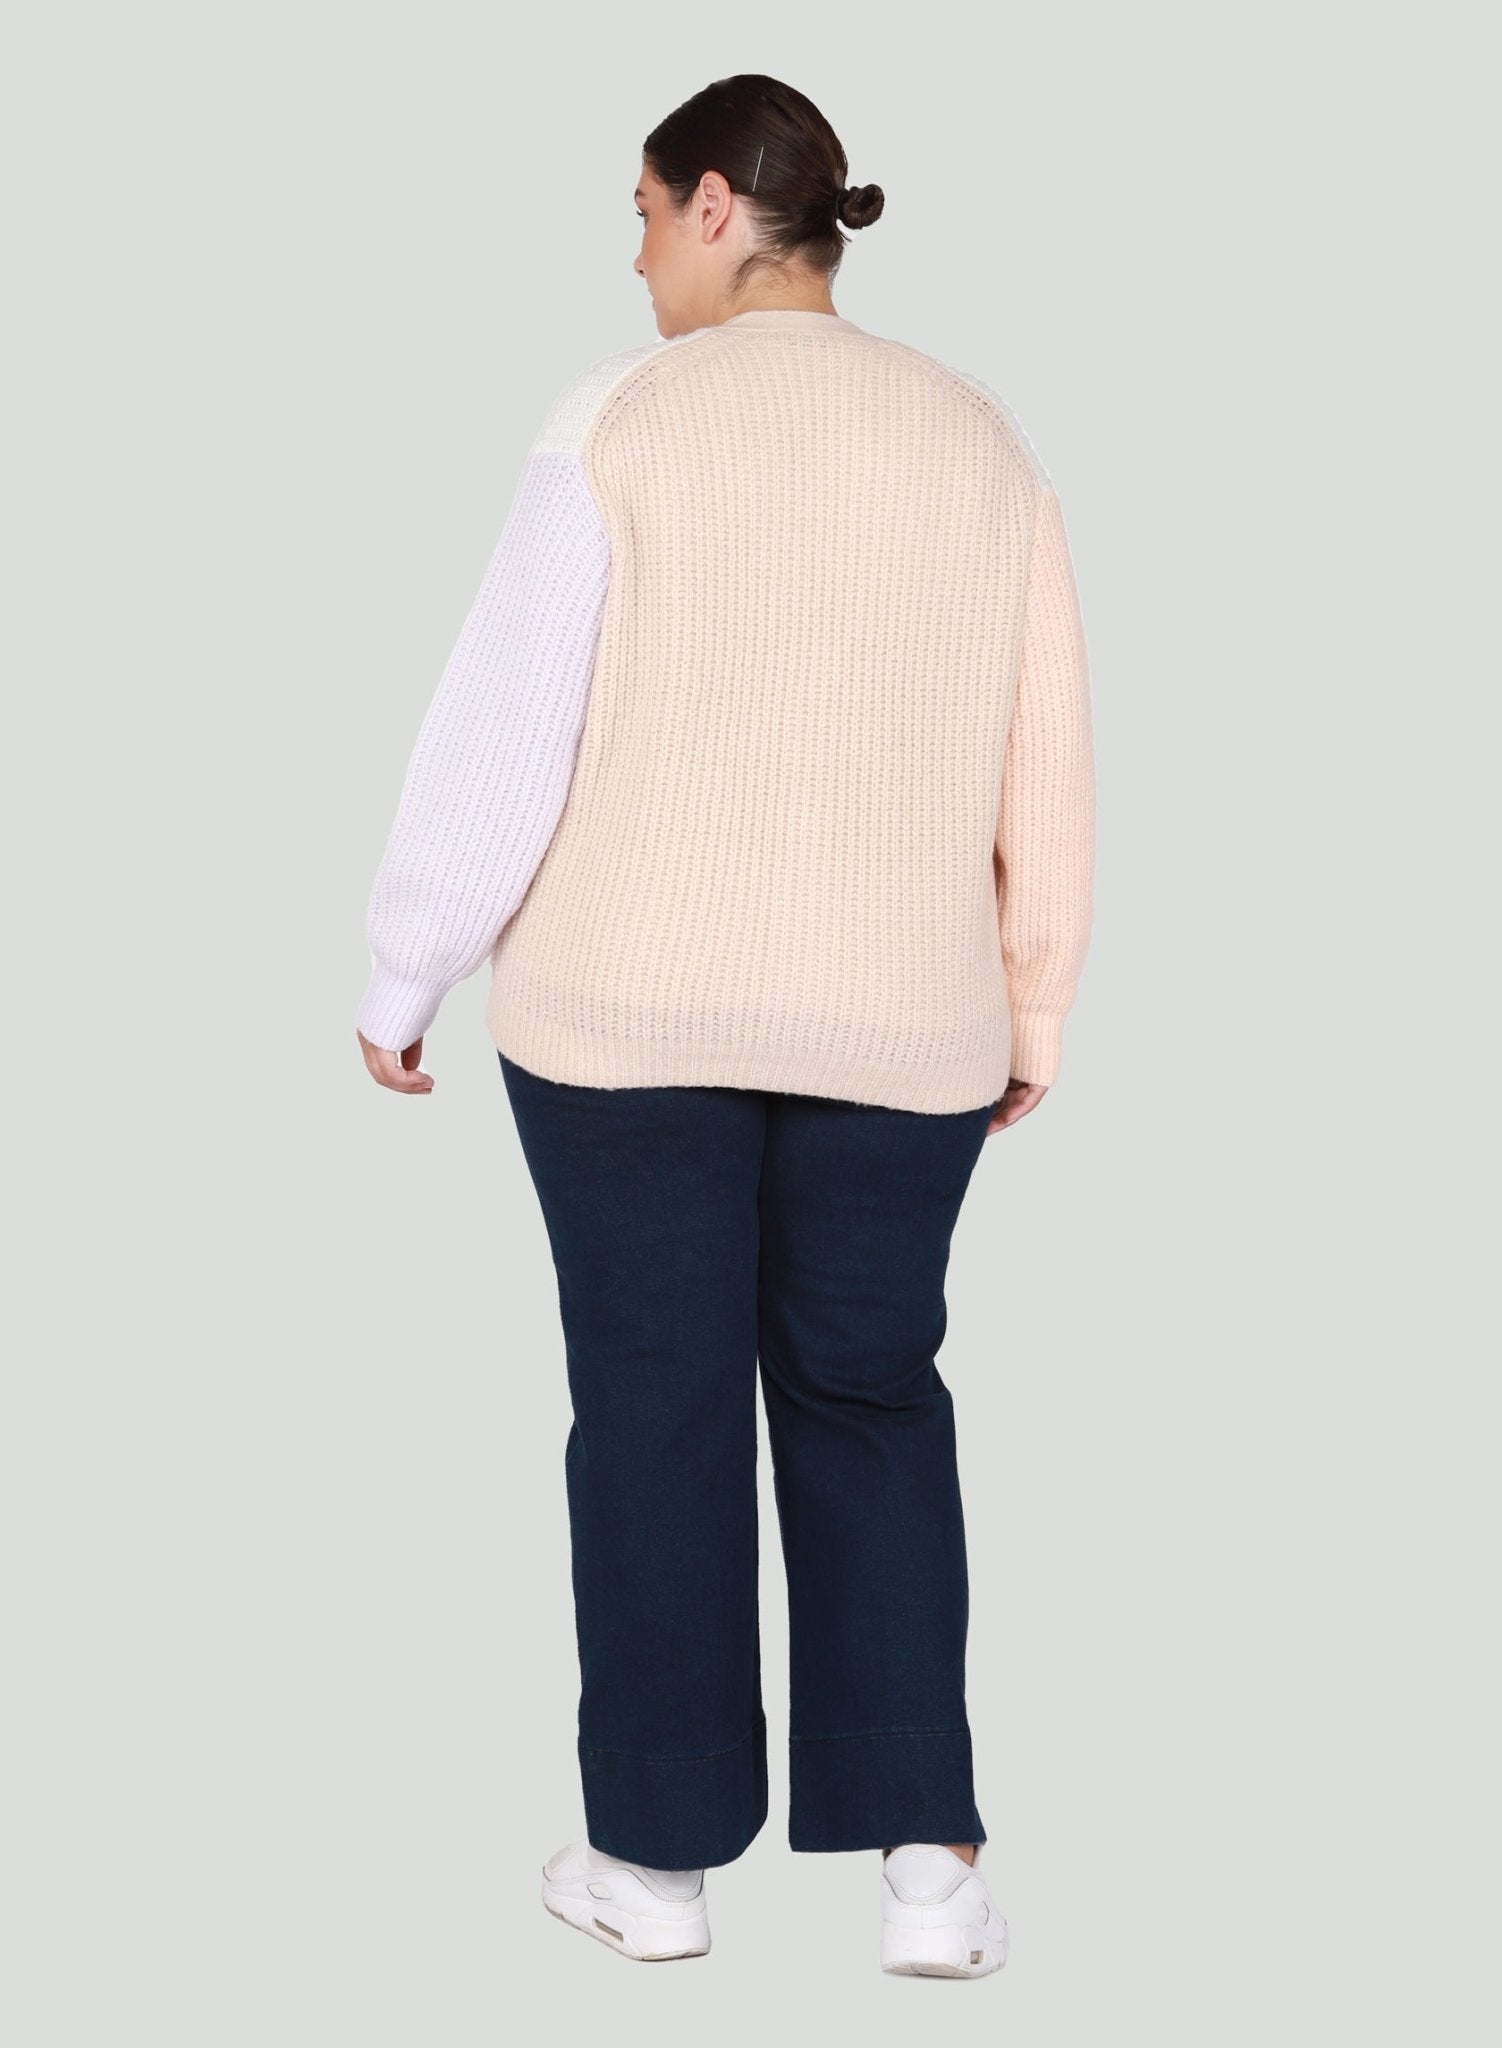 Cozy Plus Size Colour Block Cardigan (Coming Soon) - Pinned Up Bra Lounge